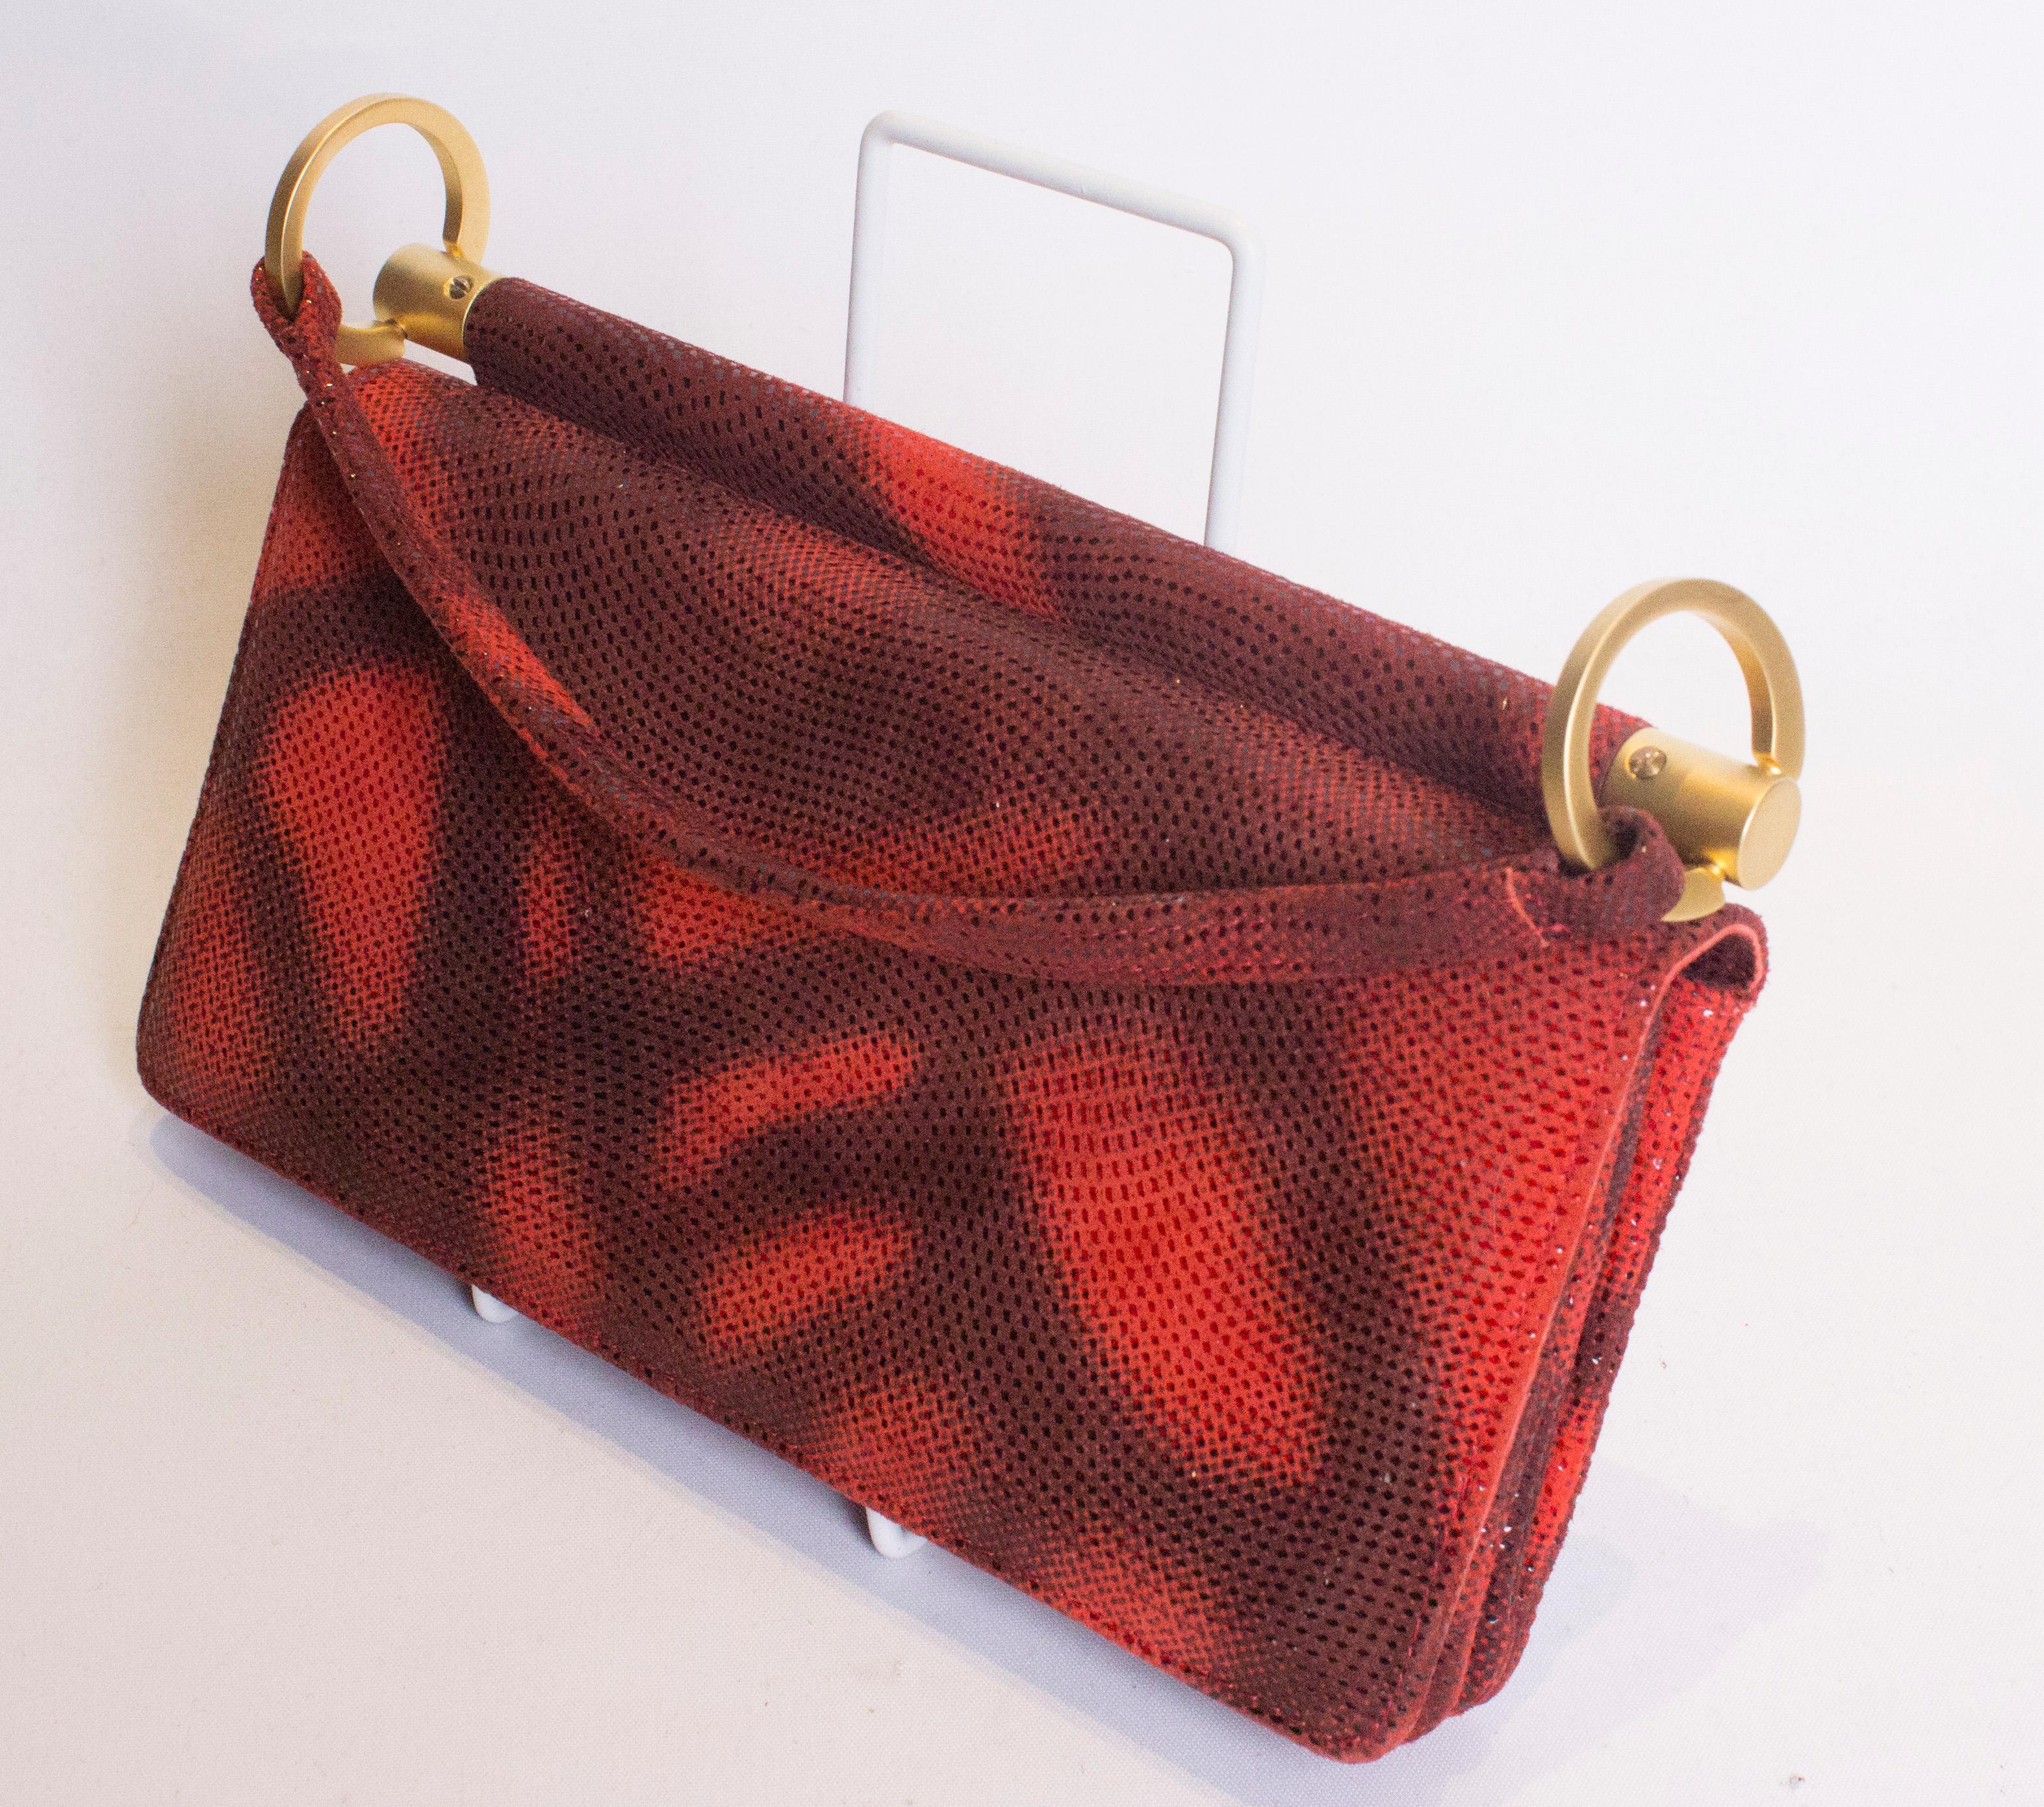 A chic vintage handbag by Charles Jourdan. The bag is in a wonderful red colour and has three internal compartments,each with a pouch pocket.  It has a flap over front and chic handle. Measurements: width 8 3/4/'', height 5'', depth 3''